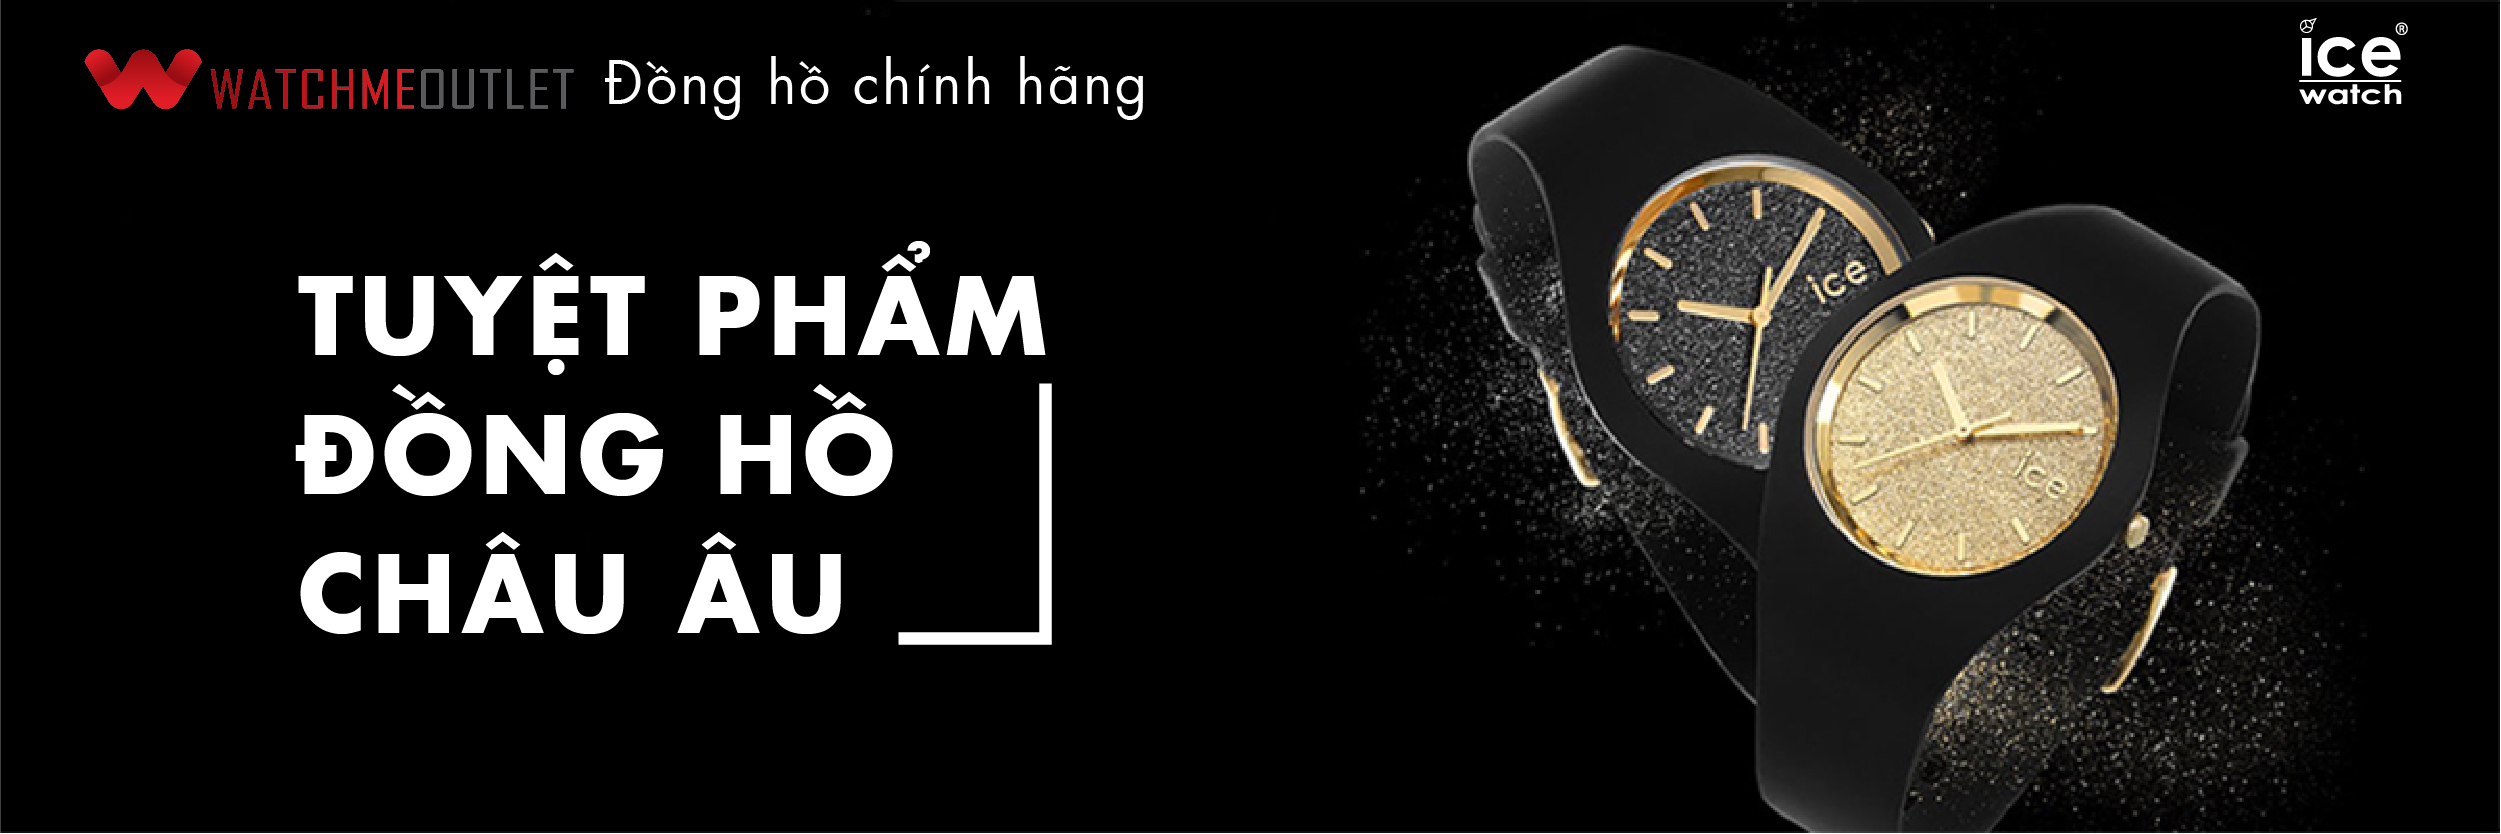 đồng hồ nam ice-watch dây silicone 40mm - 016771 1